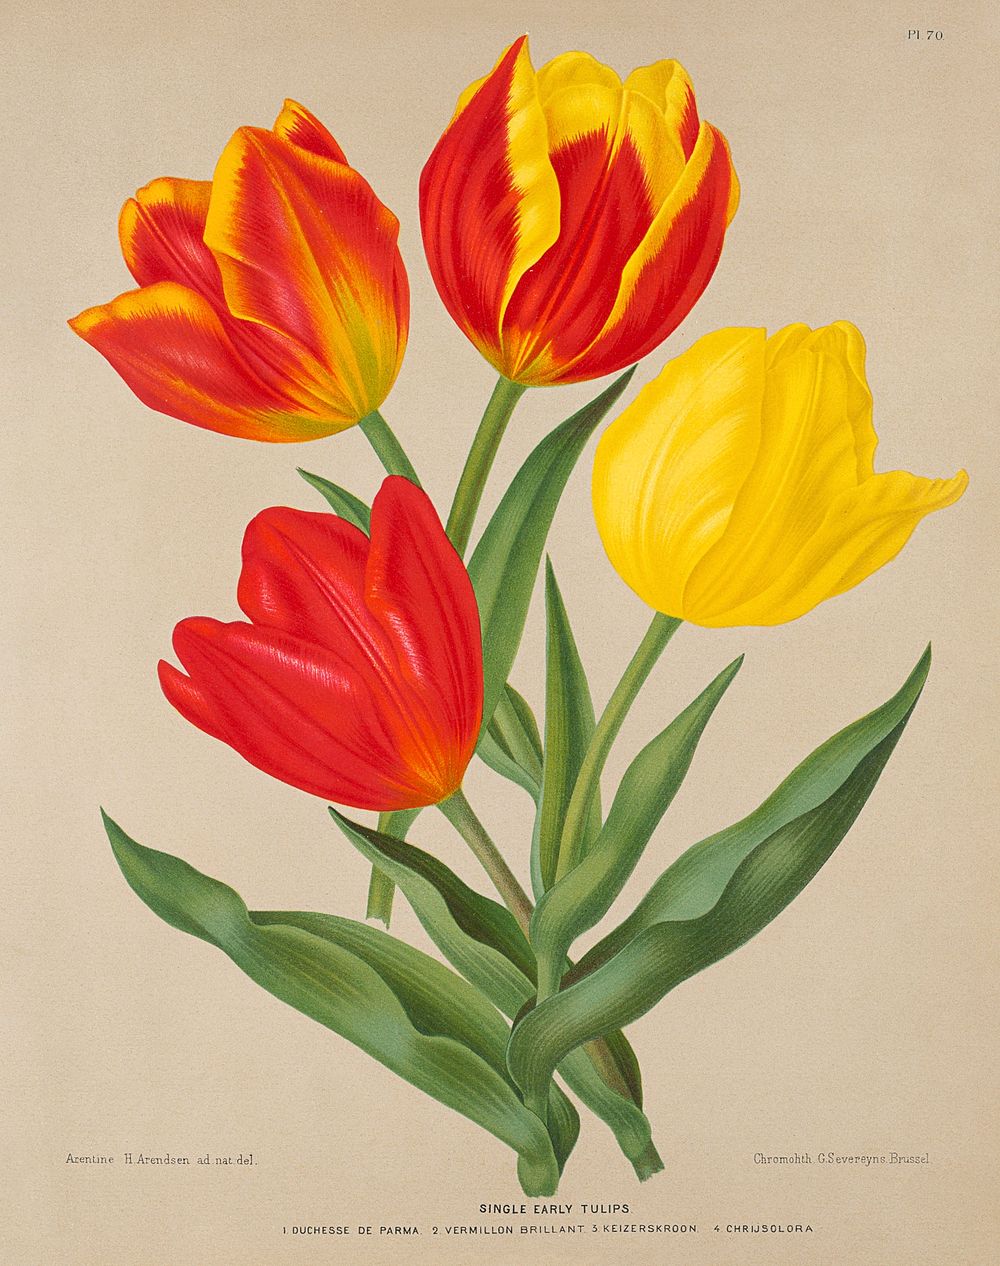 Single Early Tulips, Plate 70 from A. C. Van Eeden's "Flora of Haarlem" (1881) chromolithograph by Arentine H. Arendsen.…